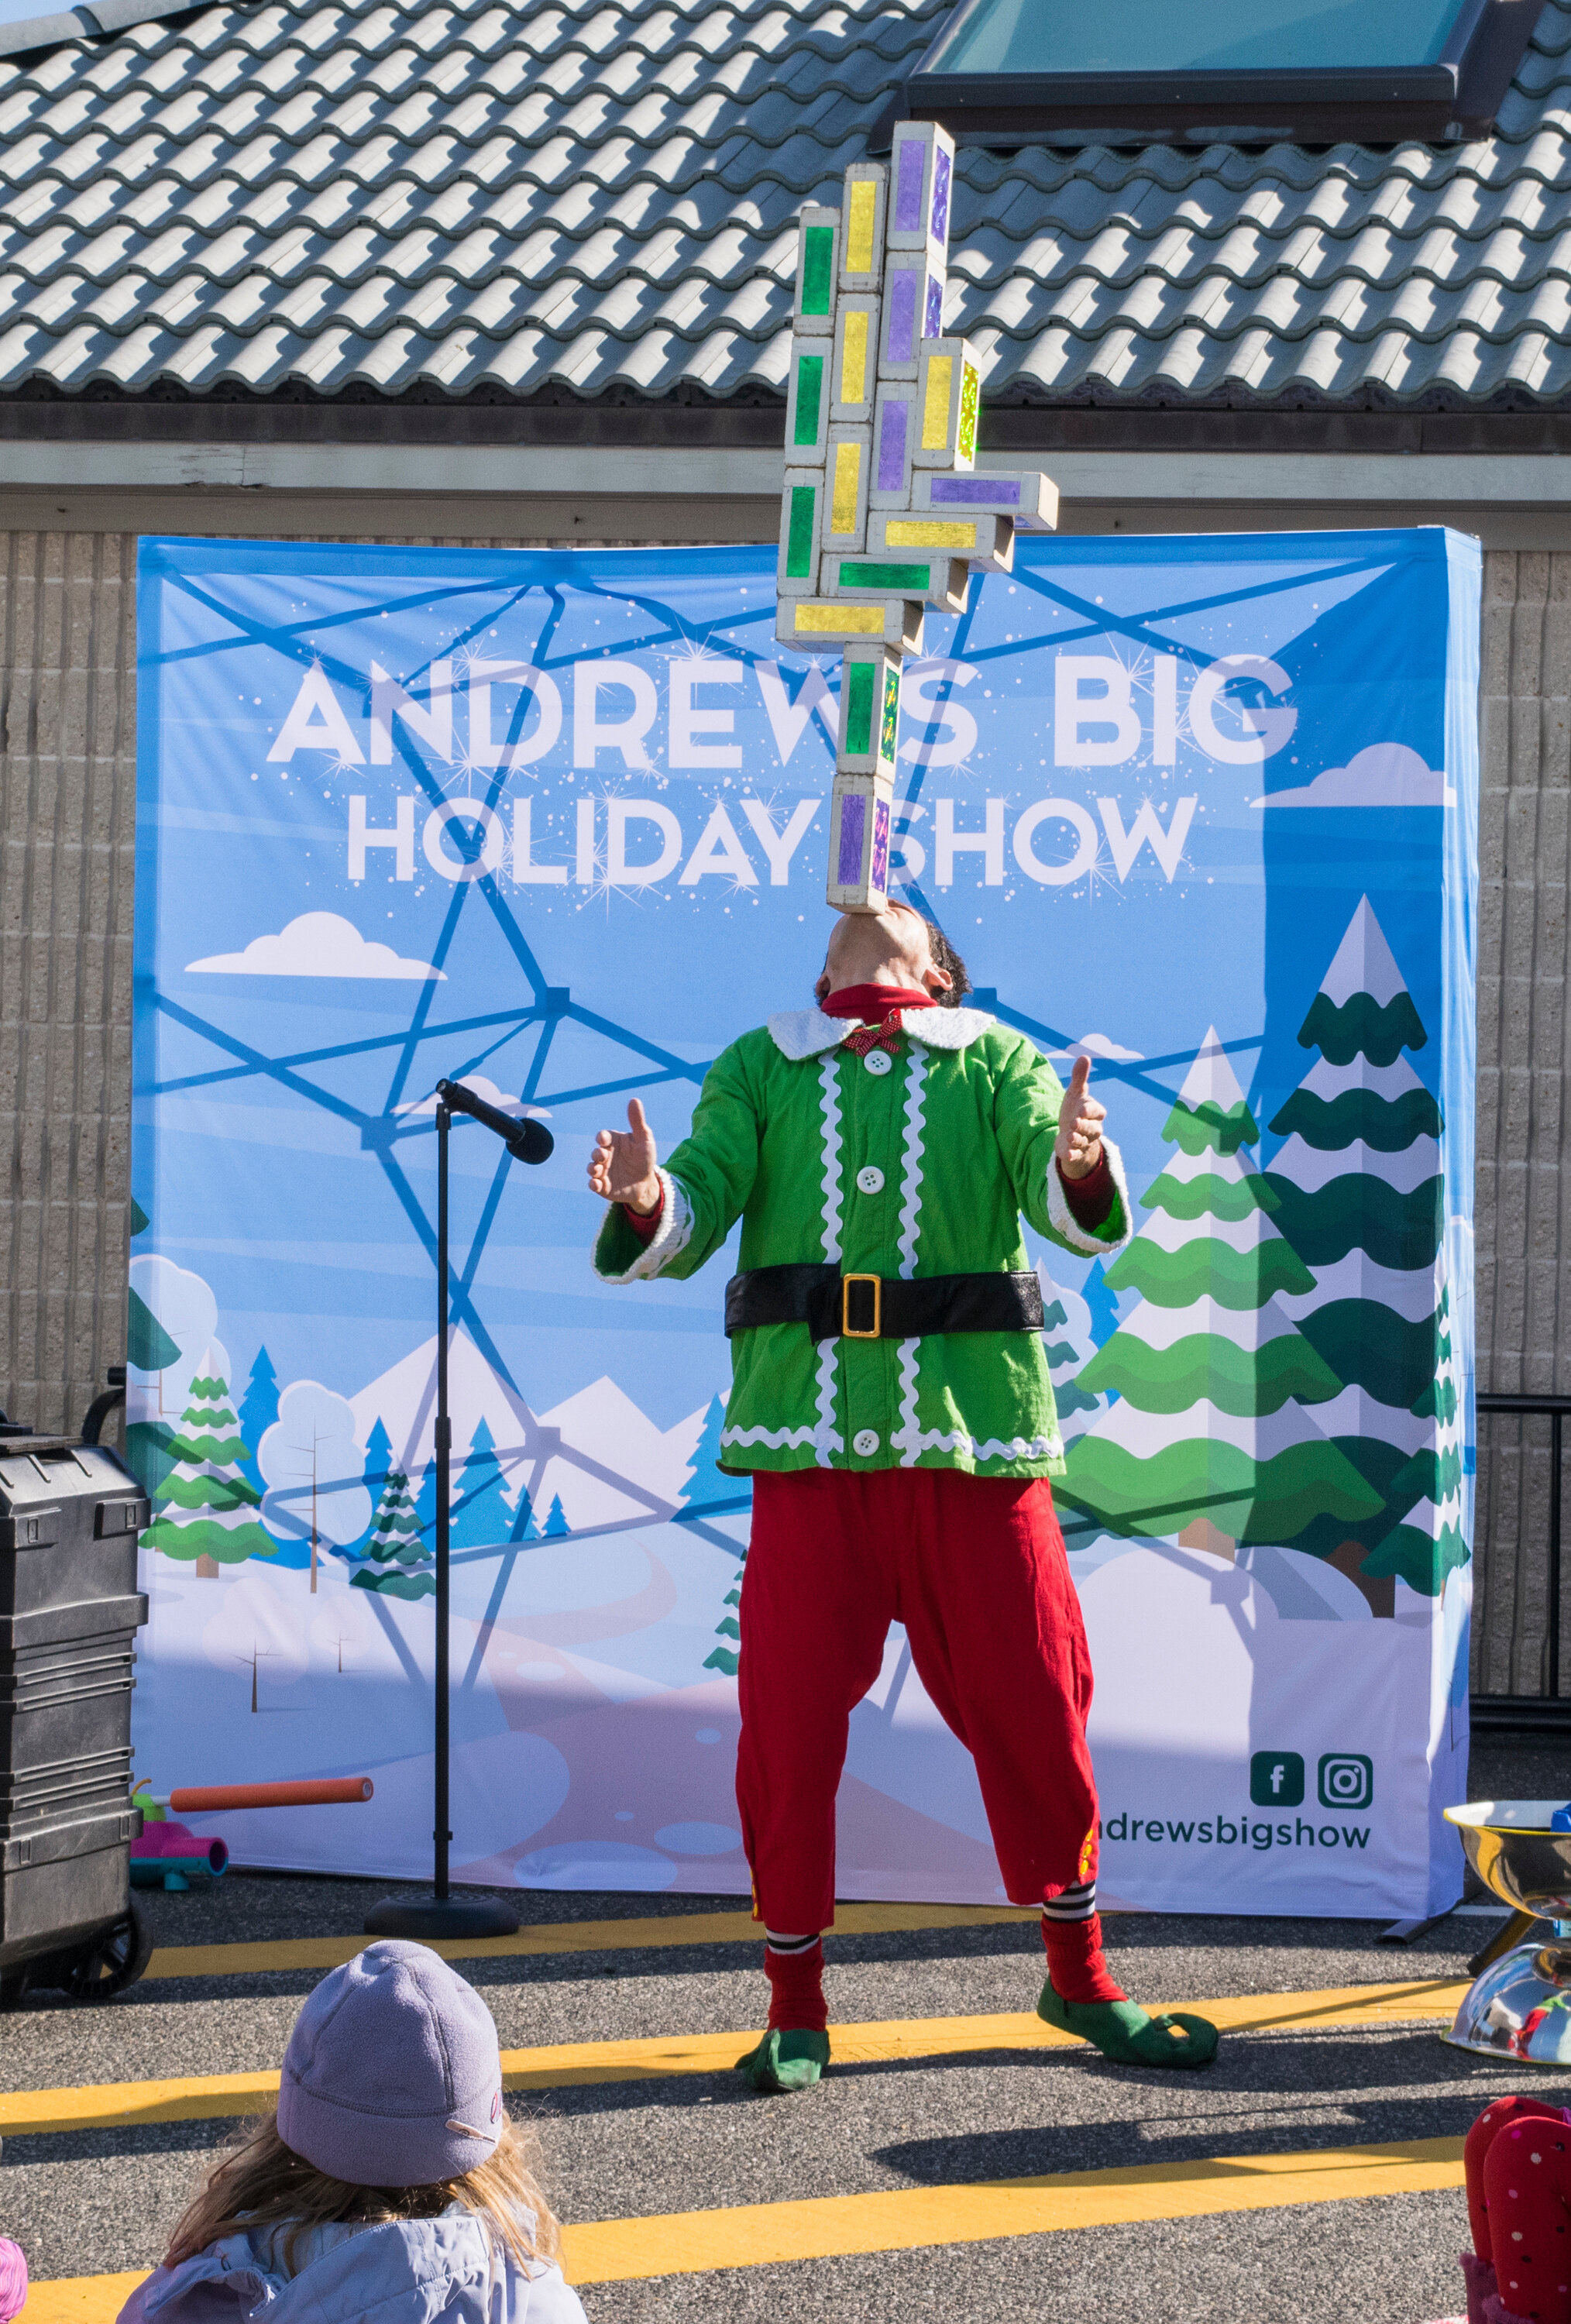 Andrew the Elf performs  his Big Holiday Show.